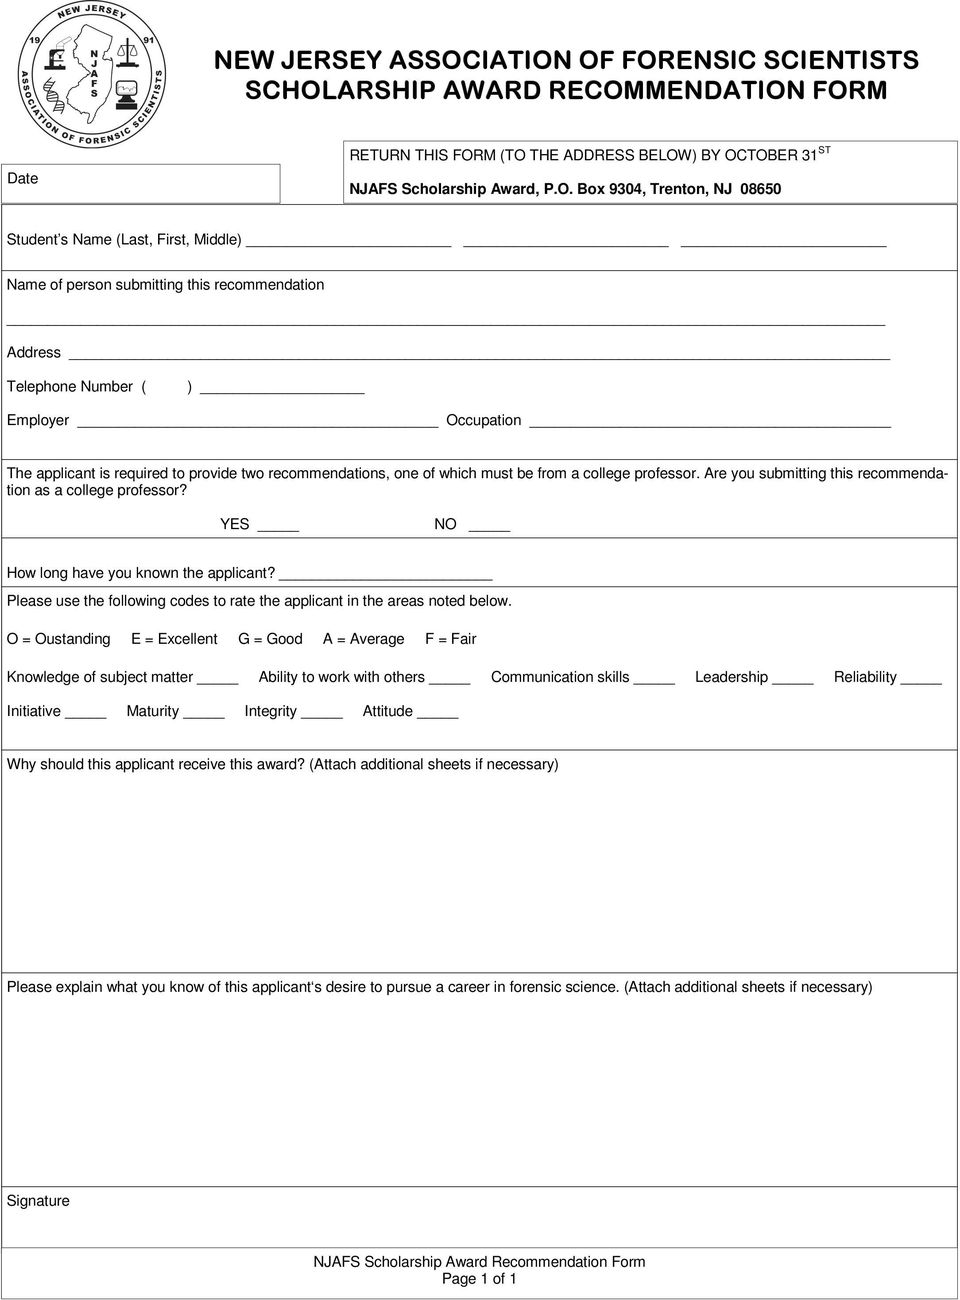 OF FORENSIC SCIENTISTS SCHOLARSHIP AWARD RECOMMENDATION FORM Date RETURN THIS FORM (TO THE ADDRESS BELOW) BY OCTOBER 31 ST NJAFS Scholarship Award, P.O. Box 9304, Trenton, NJ 08650 Student s Name